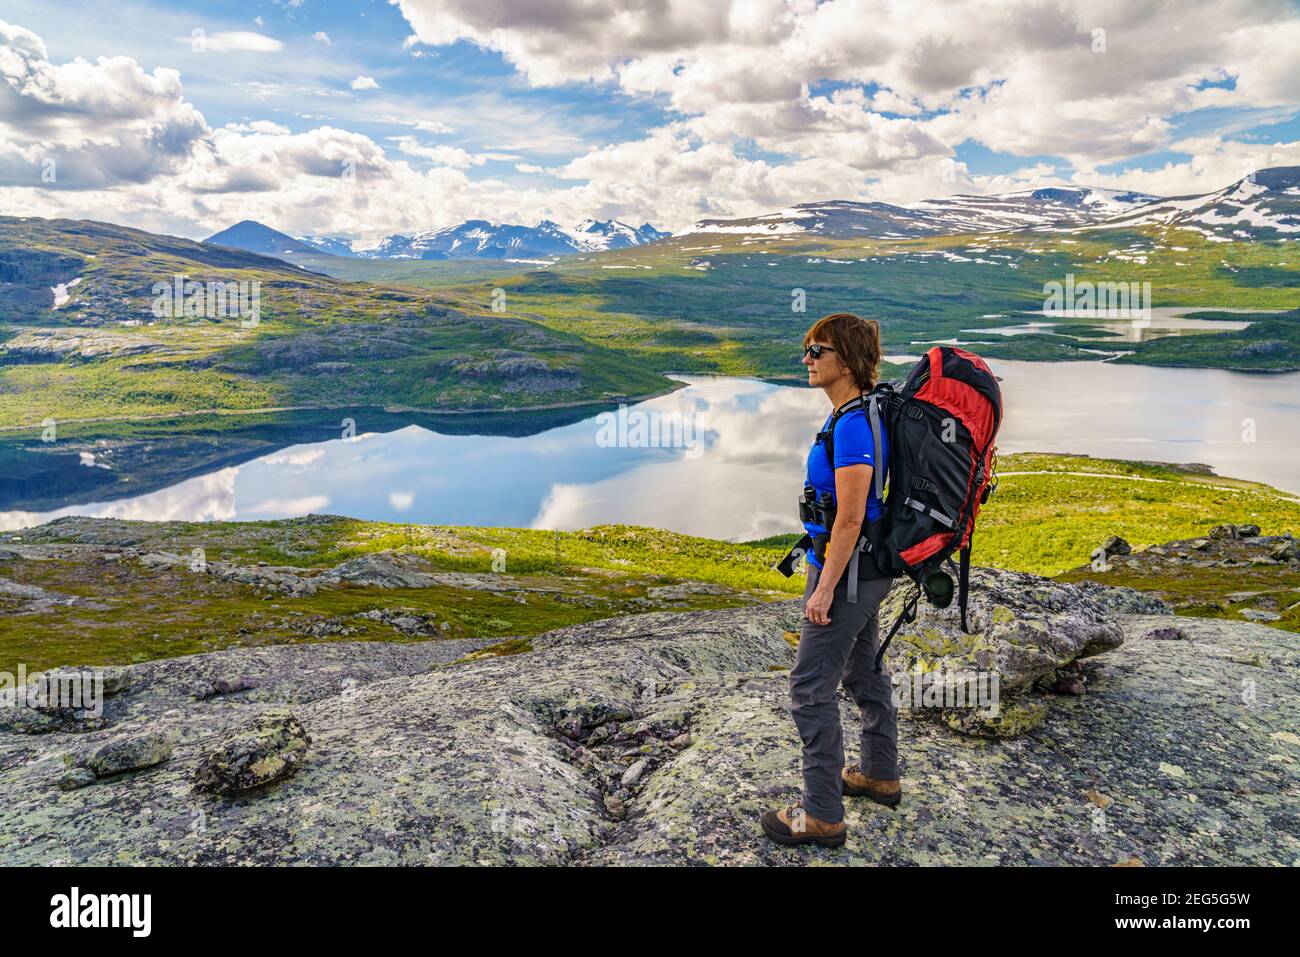 Woman on a mountain with a backpack watching the nice view with  mountains in the background, Stora sjöfallets nationalpark, Swedish Lapland, Sweden Stock Photo